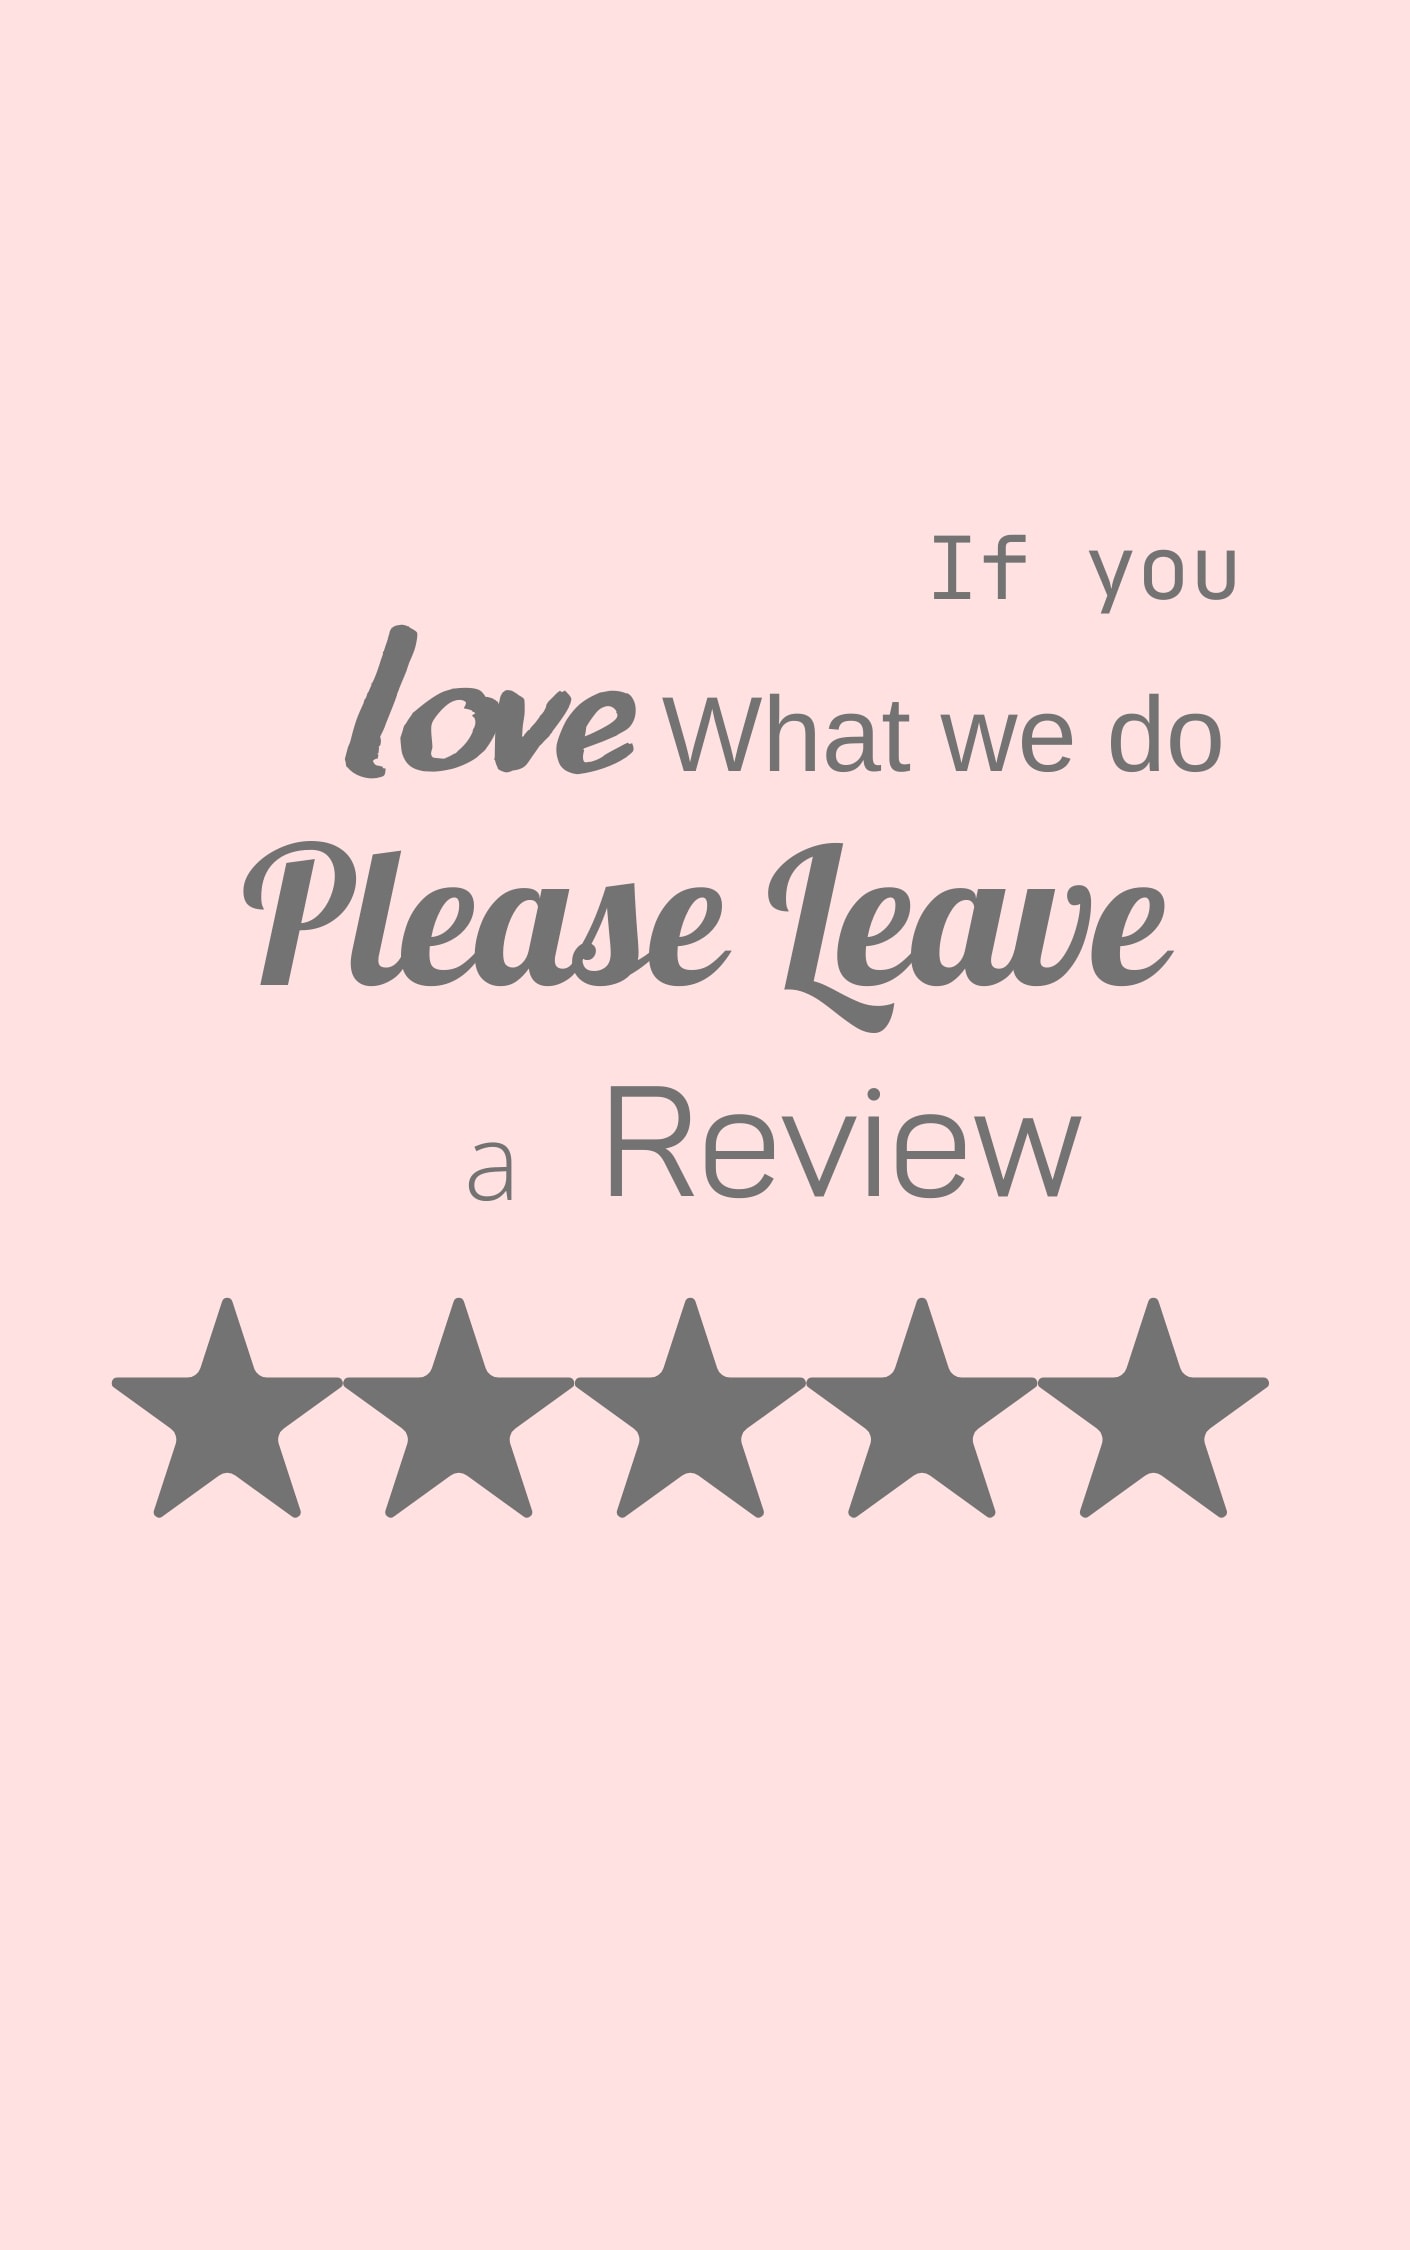 If you Love what we do Please Leave a Review